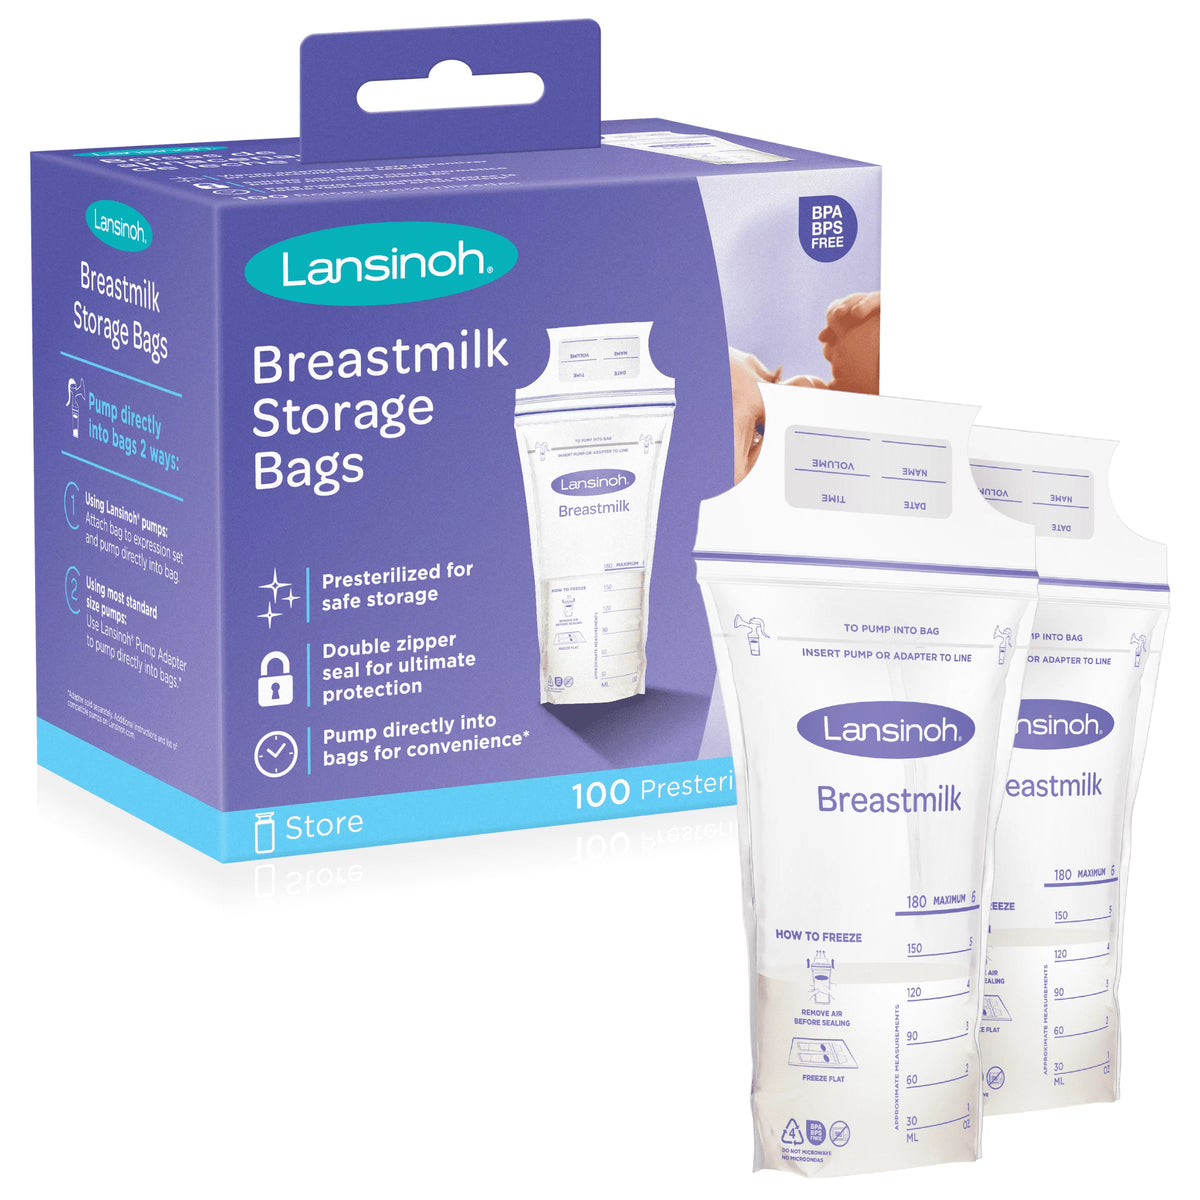 Lansinoh Ultimate Protection Disposable Nursing Pads, 50 Count